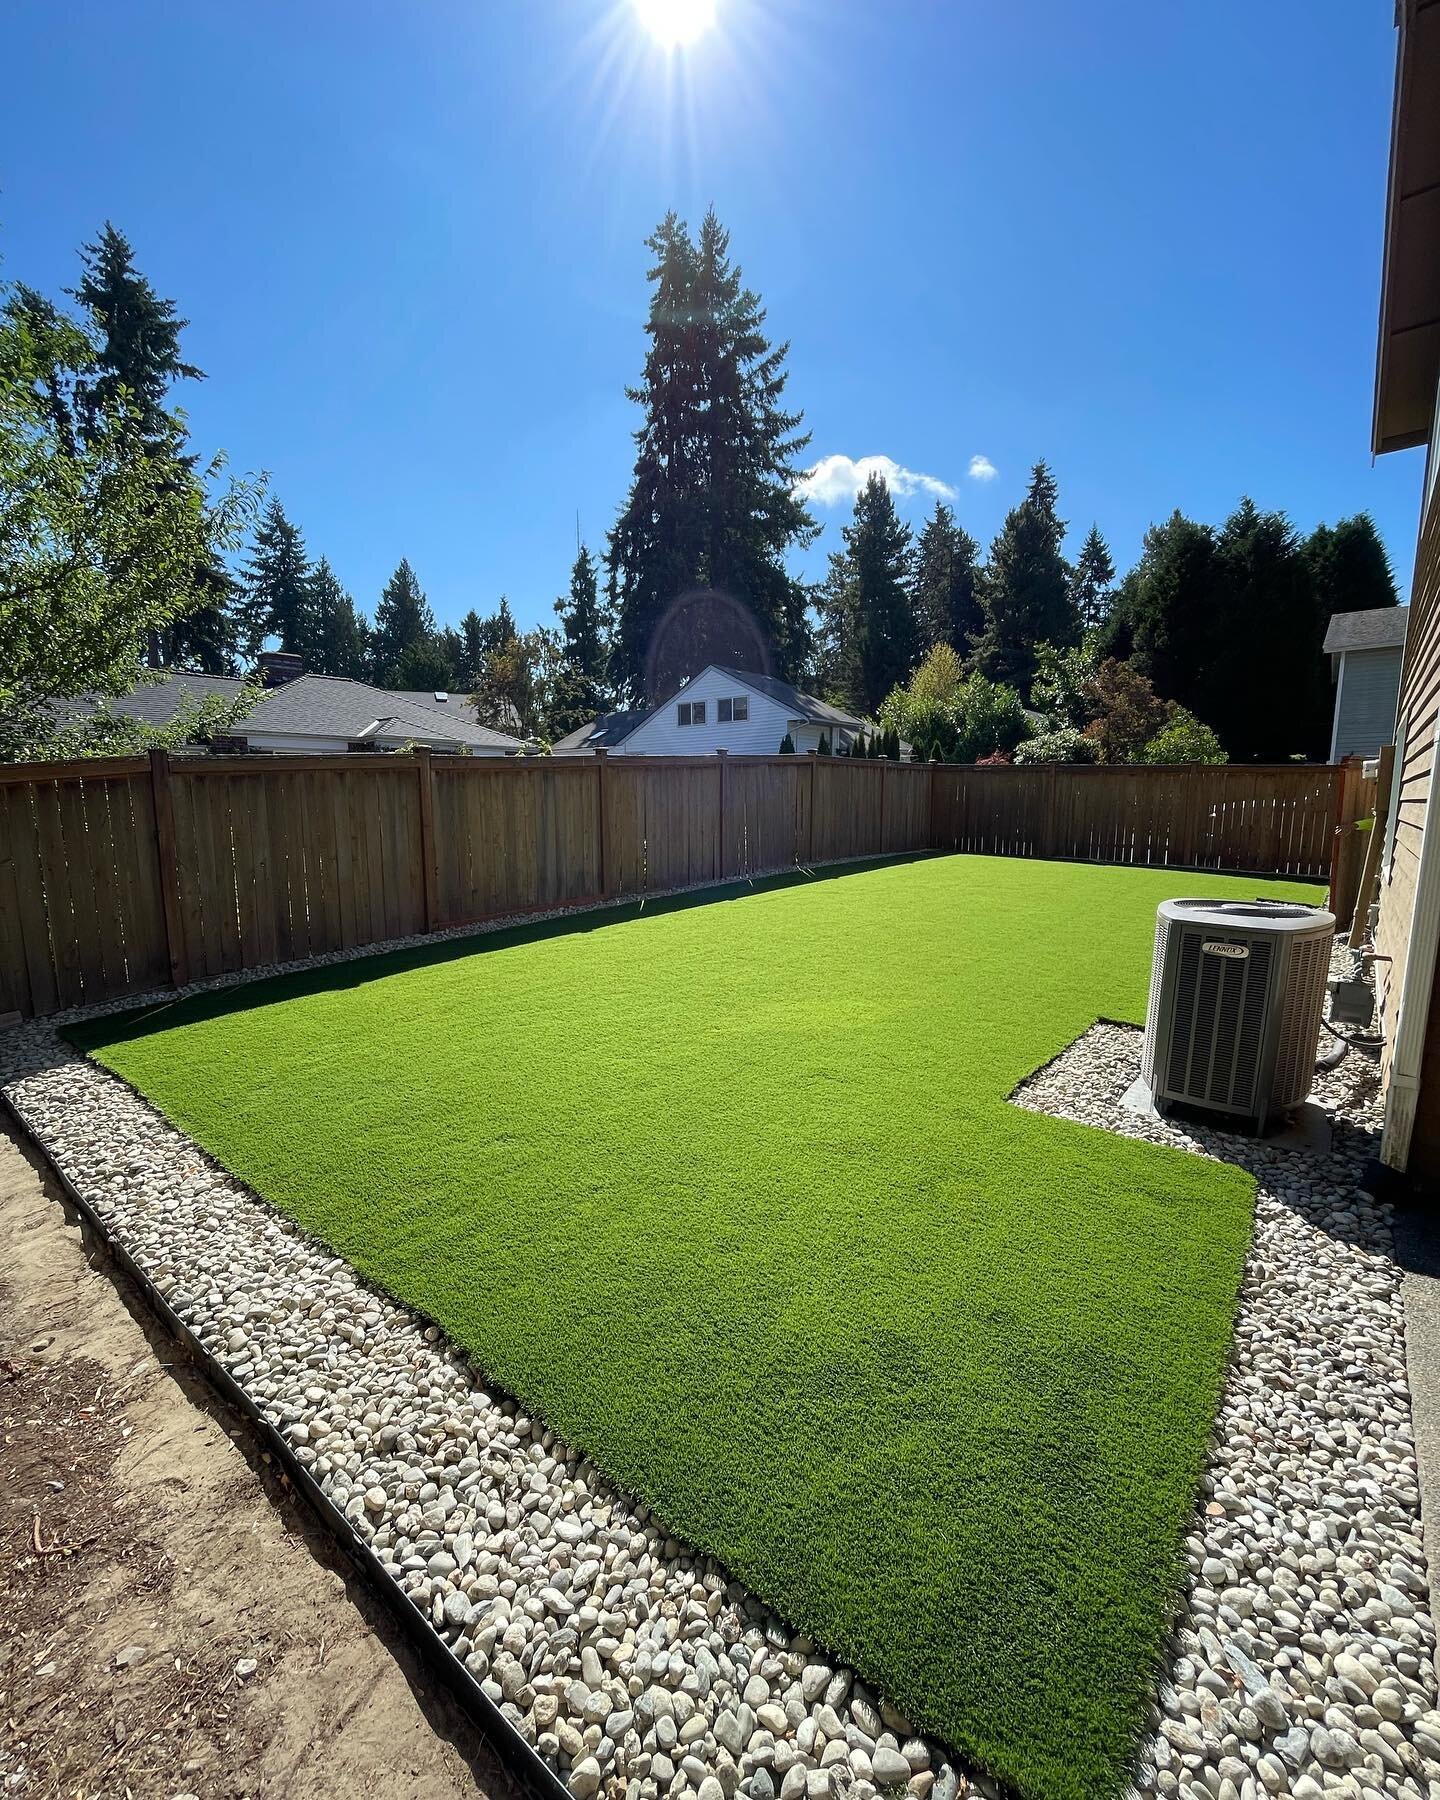 Here is a couple of projects we have completed recently. 

-Artificial Turf 
-Retaining Wall
-Fence
-Sod
-Pavers

Message us today to get an estimate scheduled!